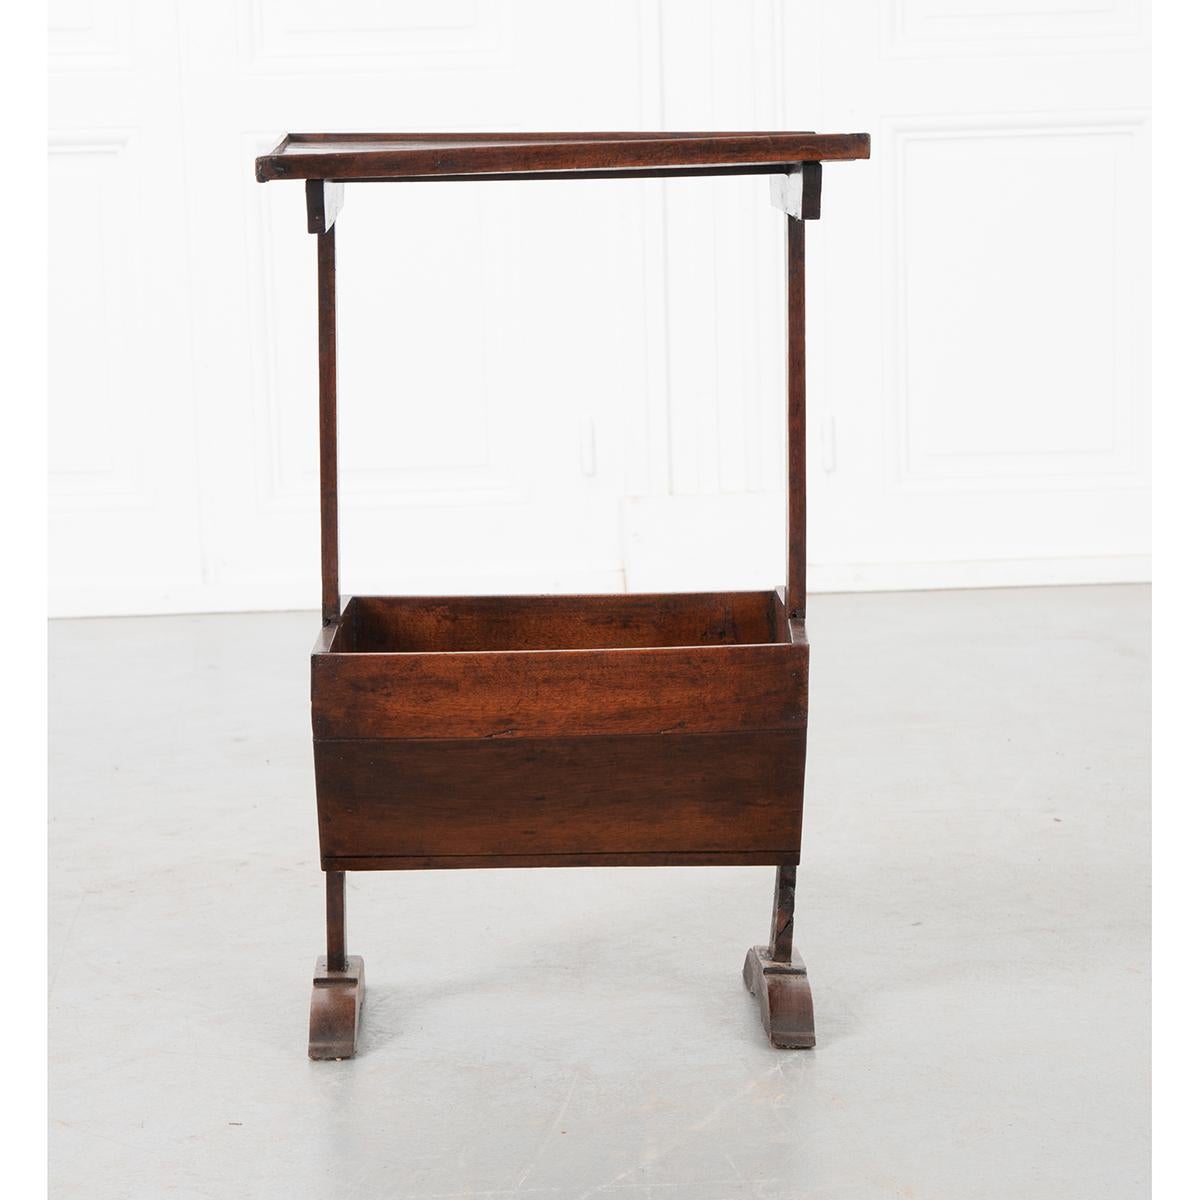 This simple little walnut table from 19th century France is actually a functional sewing table. It has a flat work surface with a basket below to hold knitting or any sewing project that the owner was working on. A very handy table to have around